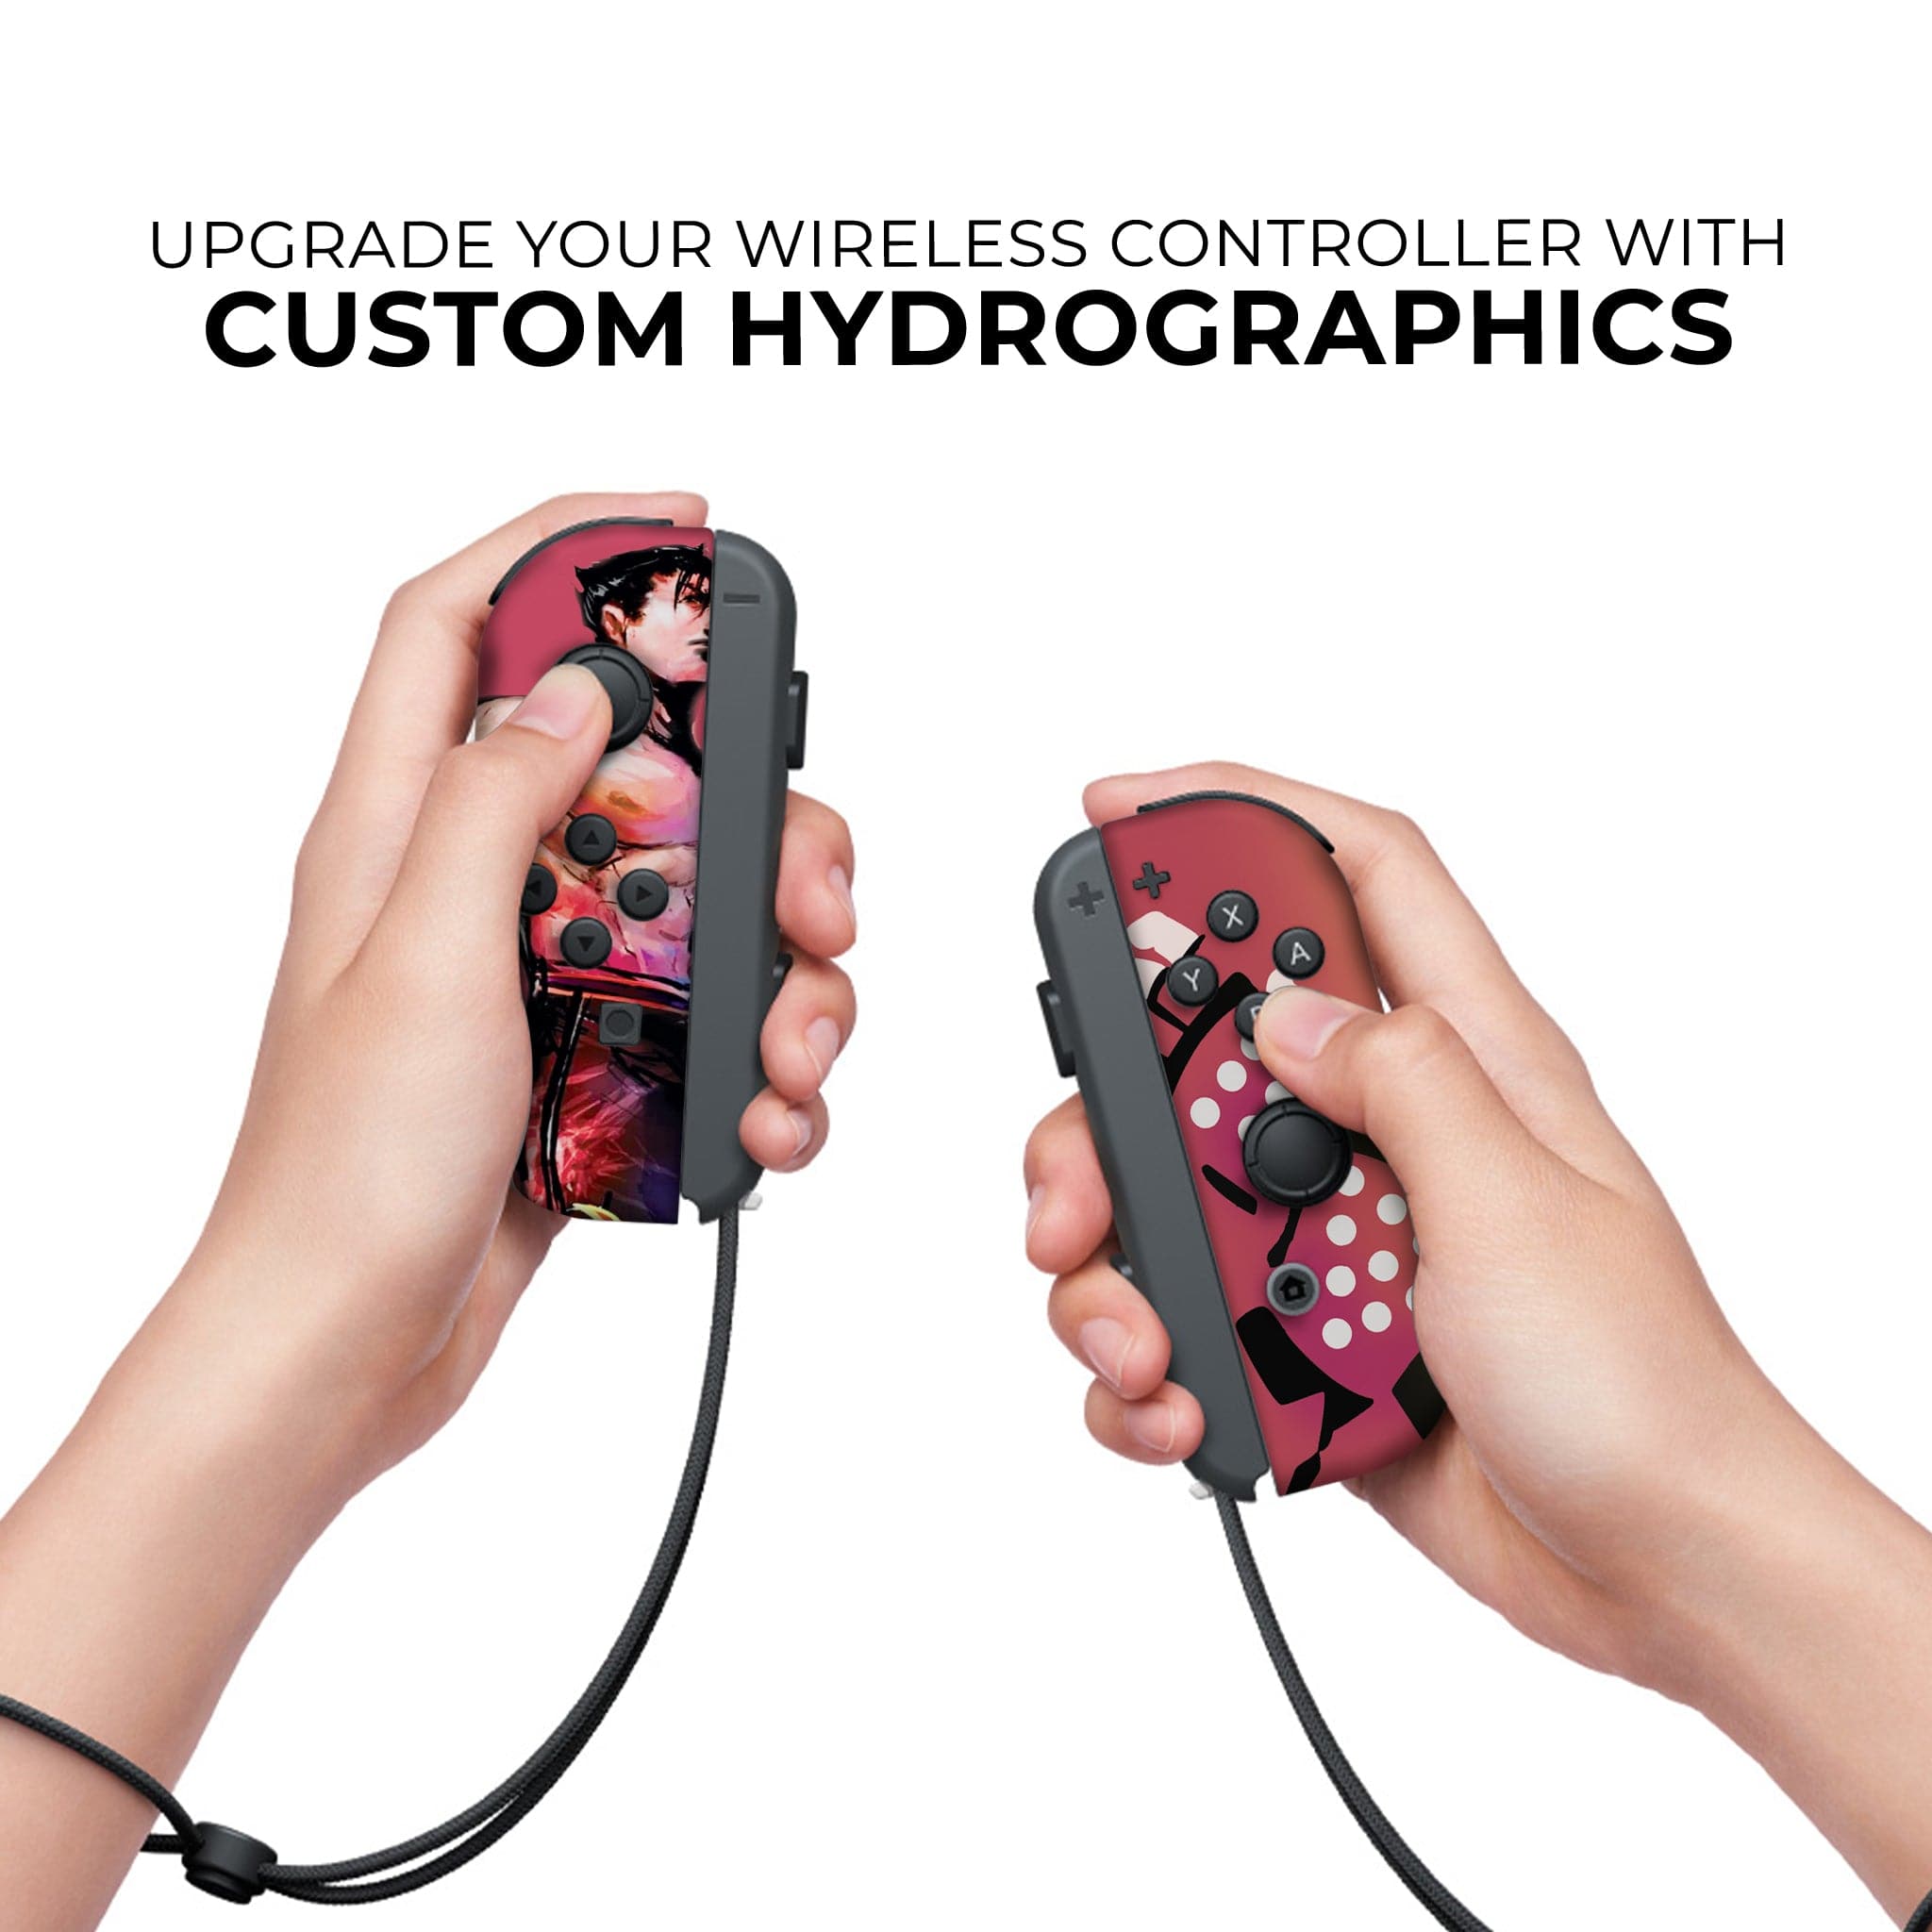 Tekken Bloodline Inspired Nintendo Switch Joy-Con Left and Right Switch Controllers